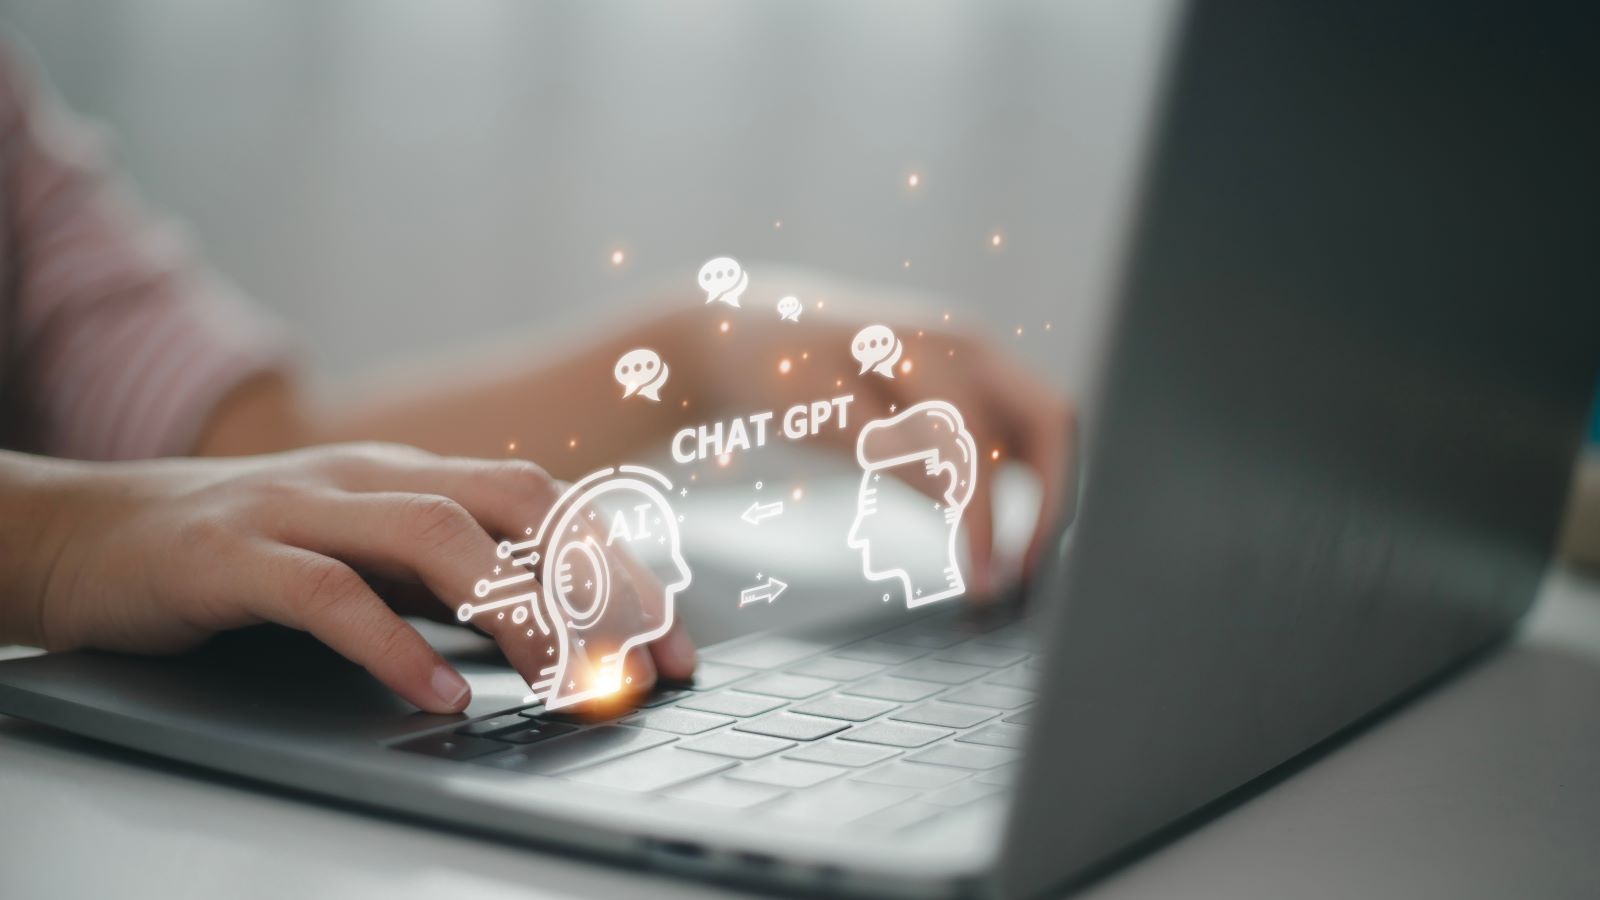 How to Use ChatGPT to Propel Your Job Search